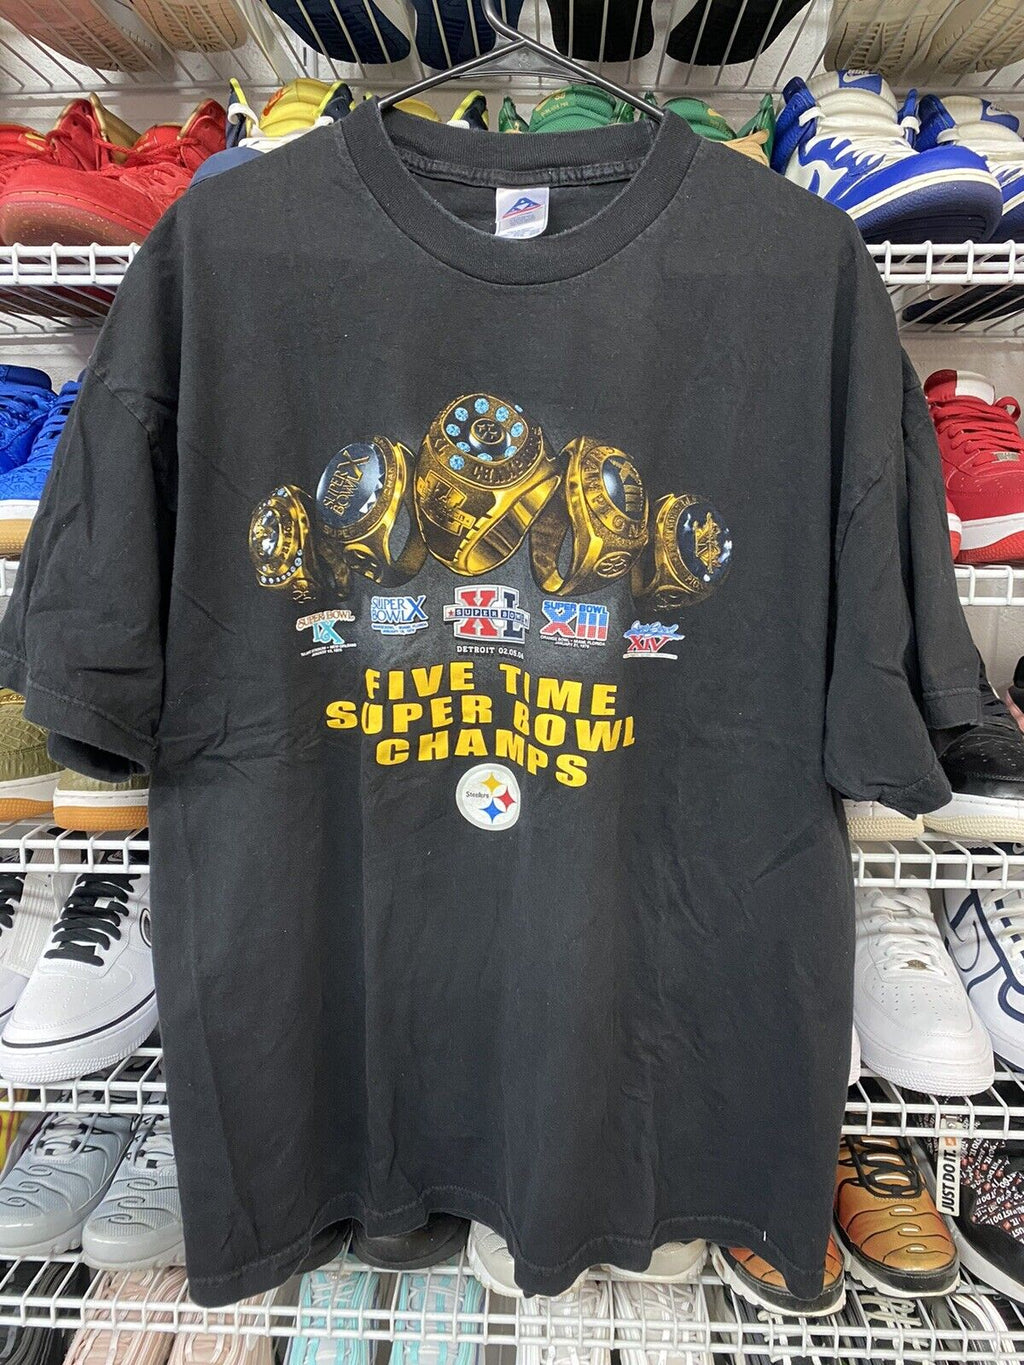 Vintage 2006 Super Bowl Pittsburgh Steelers Champions T Shirt Ring Logo XXL - Hype Stew Sneakers Detroit